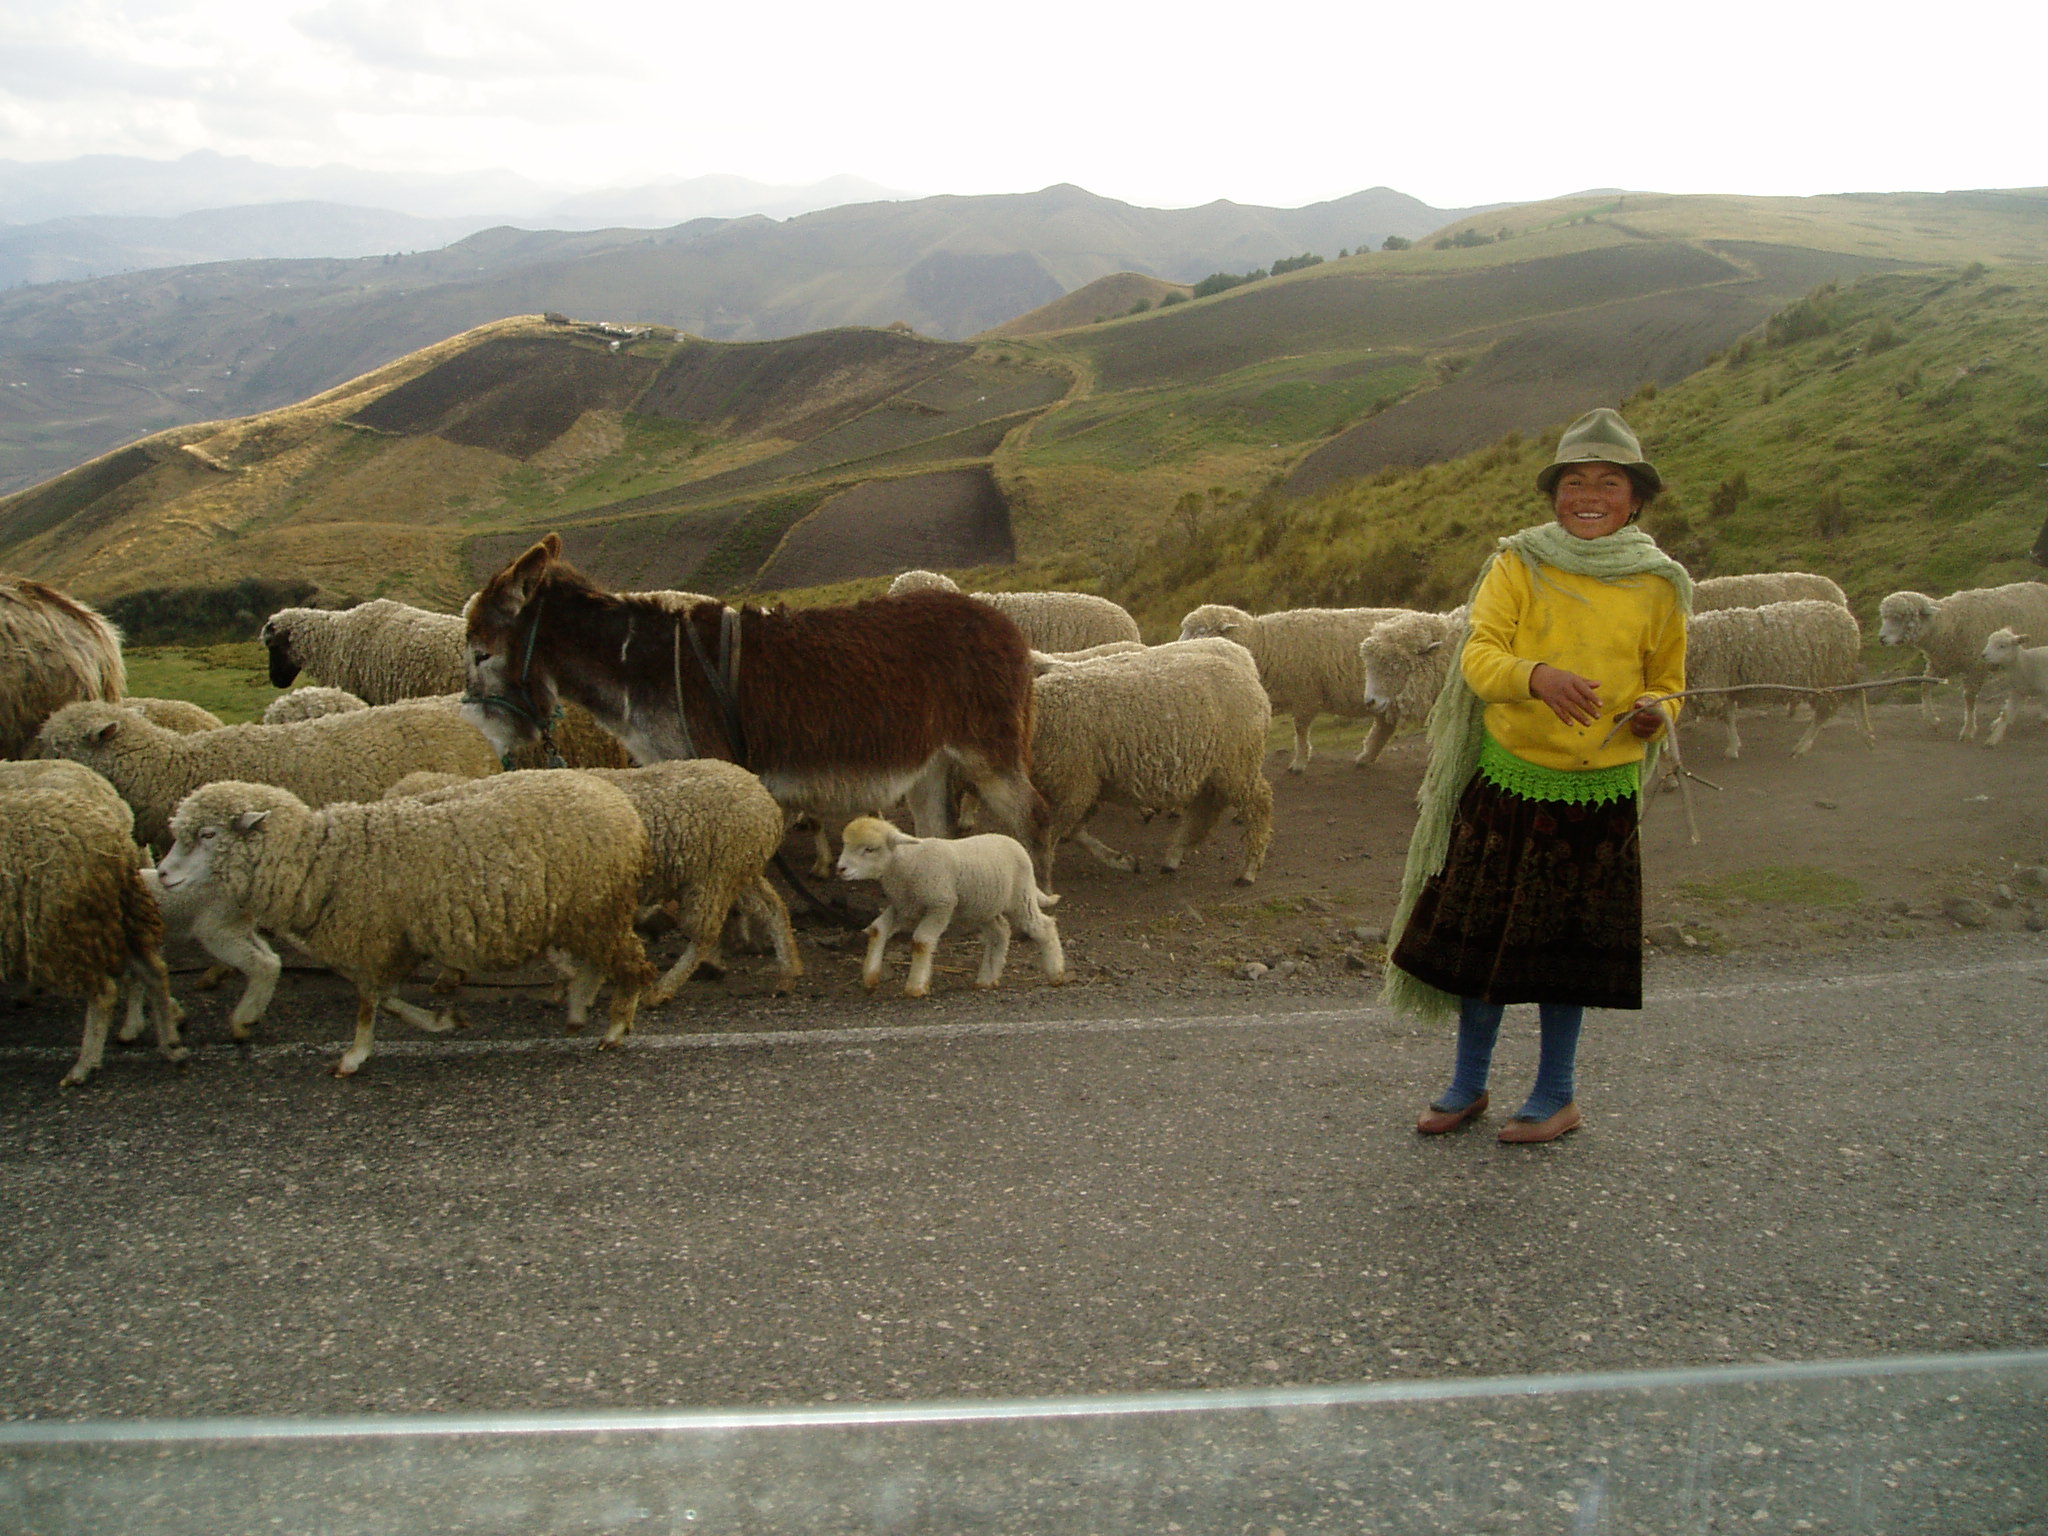 A person in the mountains, surrounded by sheep and a donkey.